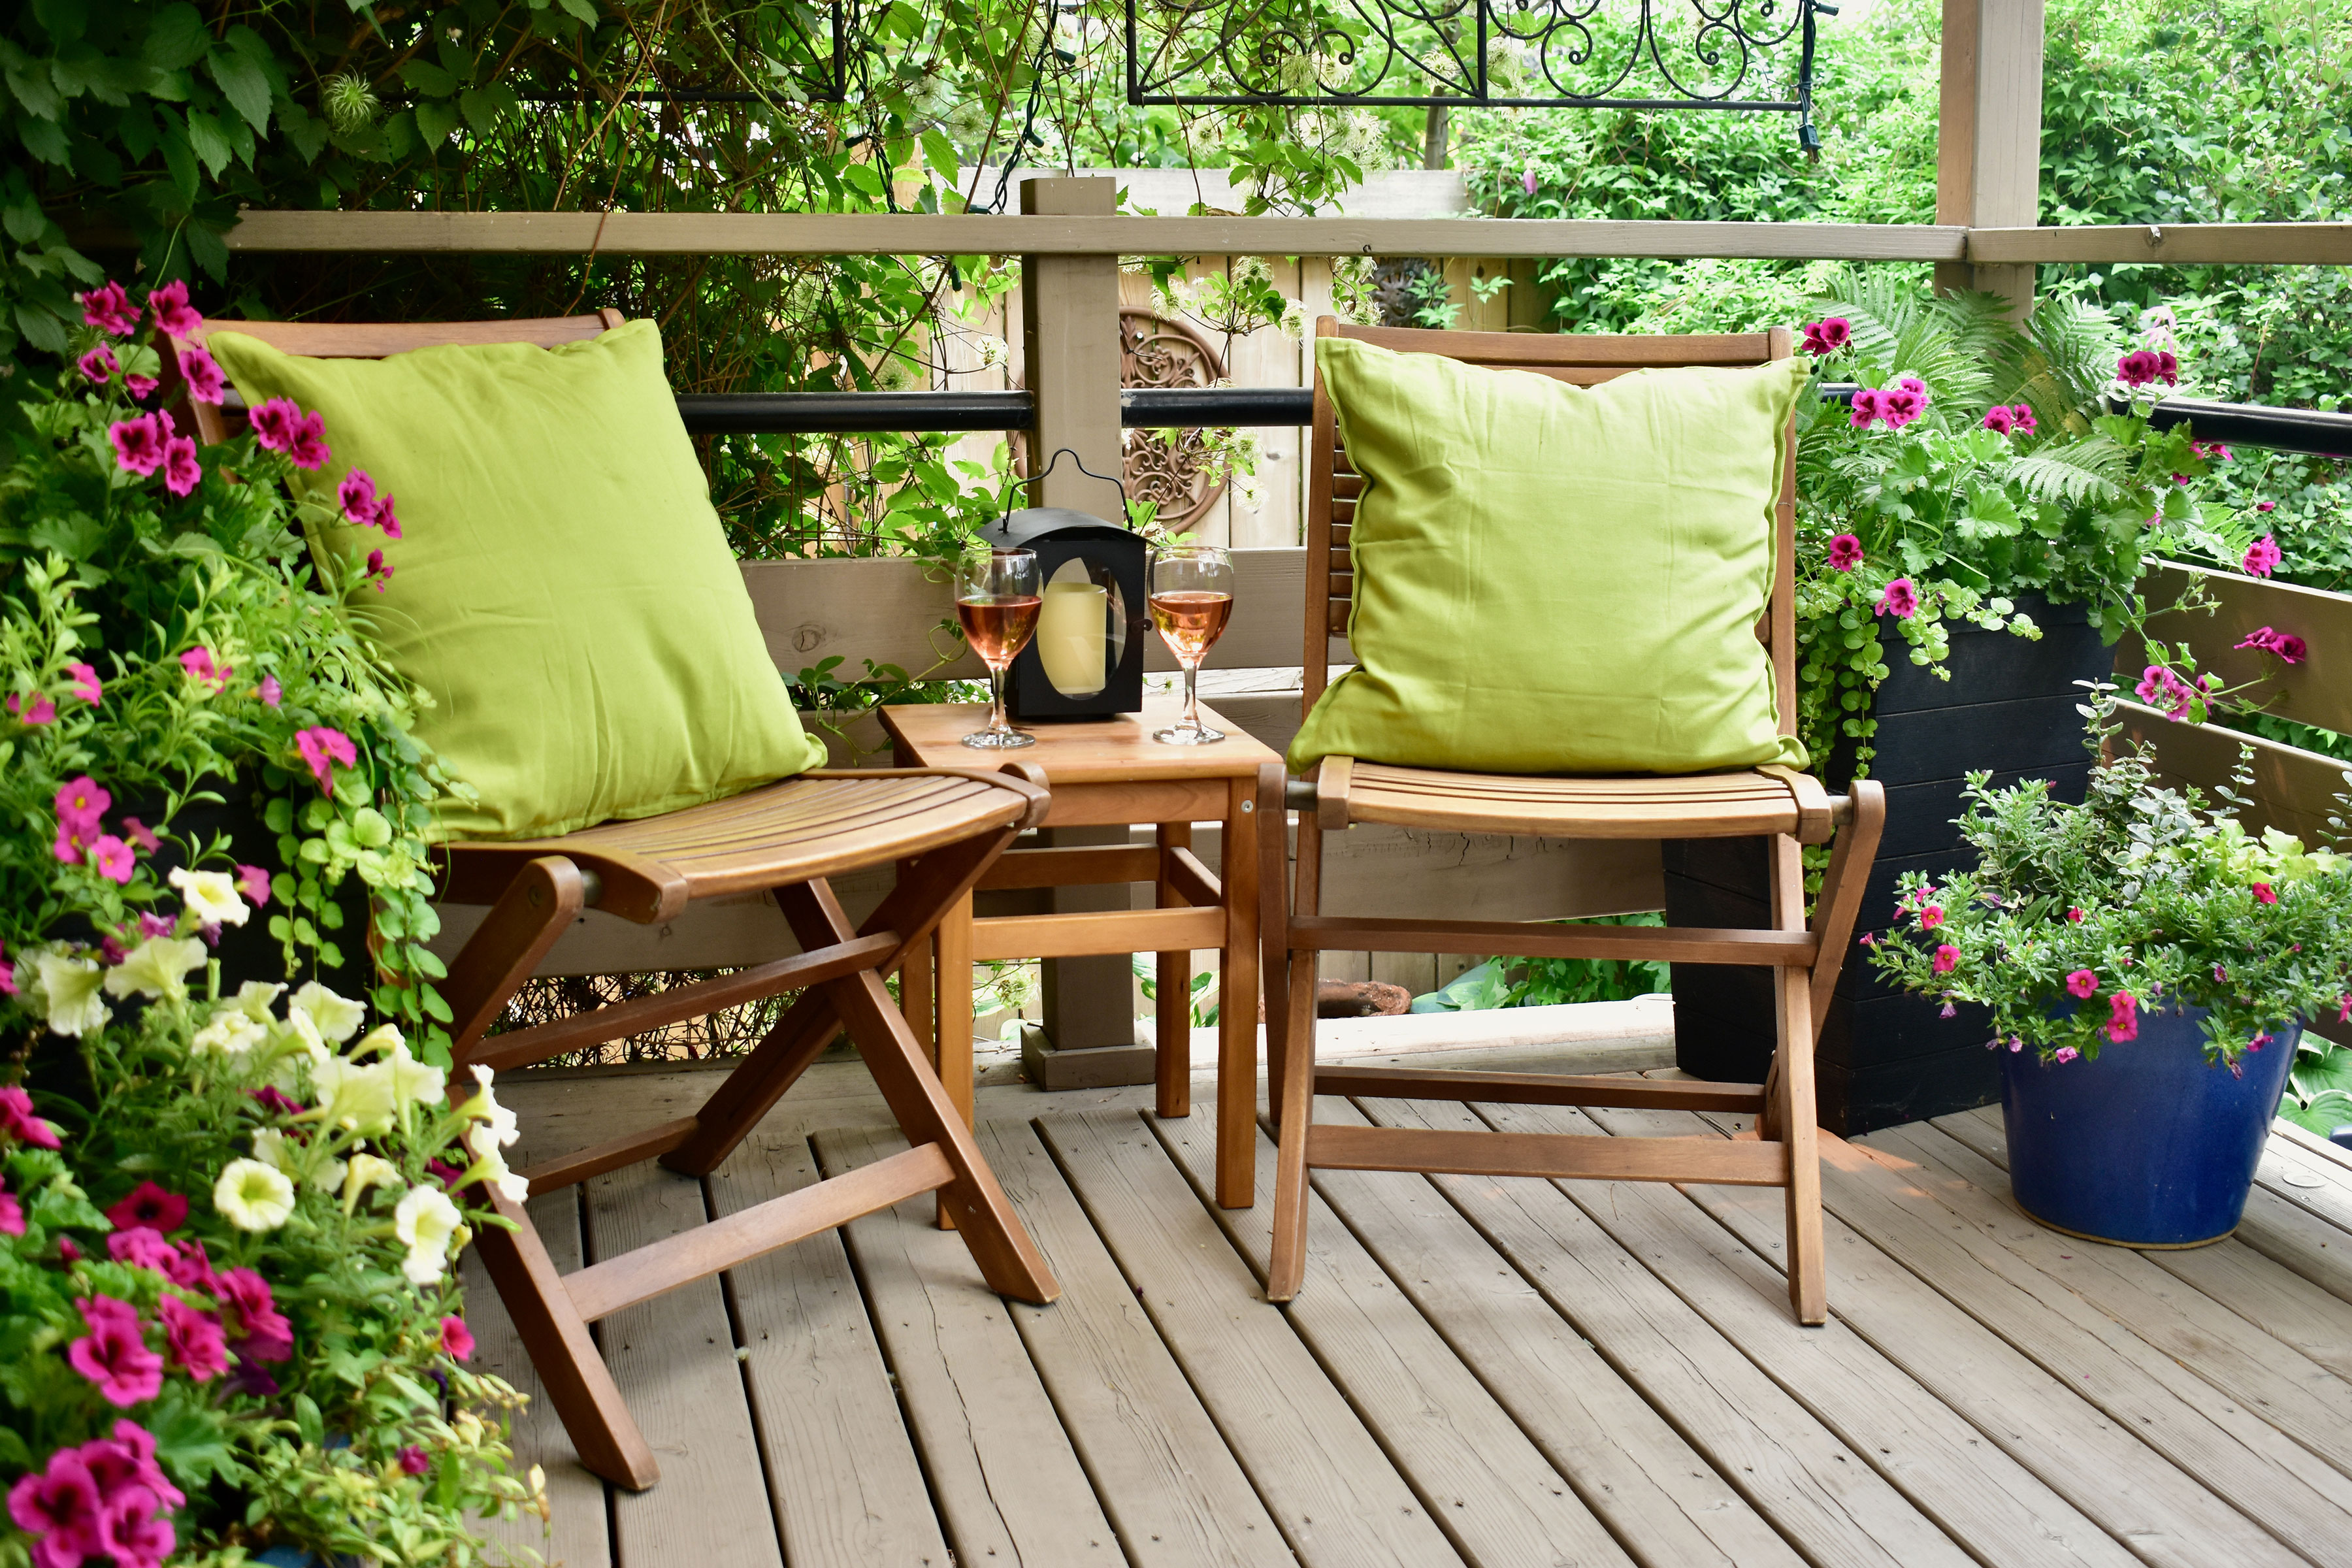 Deck with two chairs and green pillows.